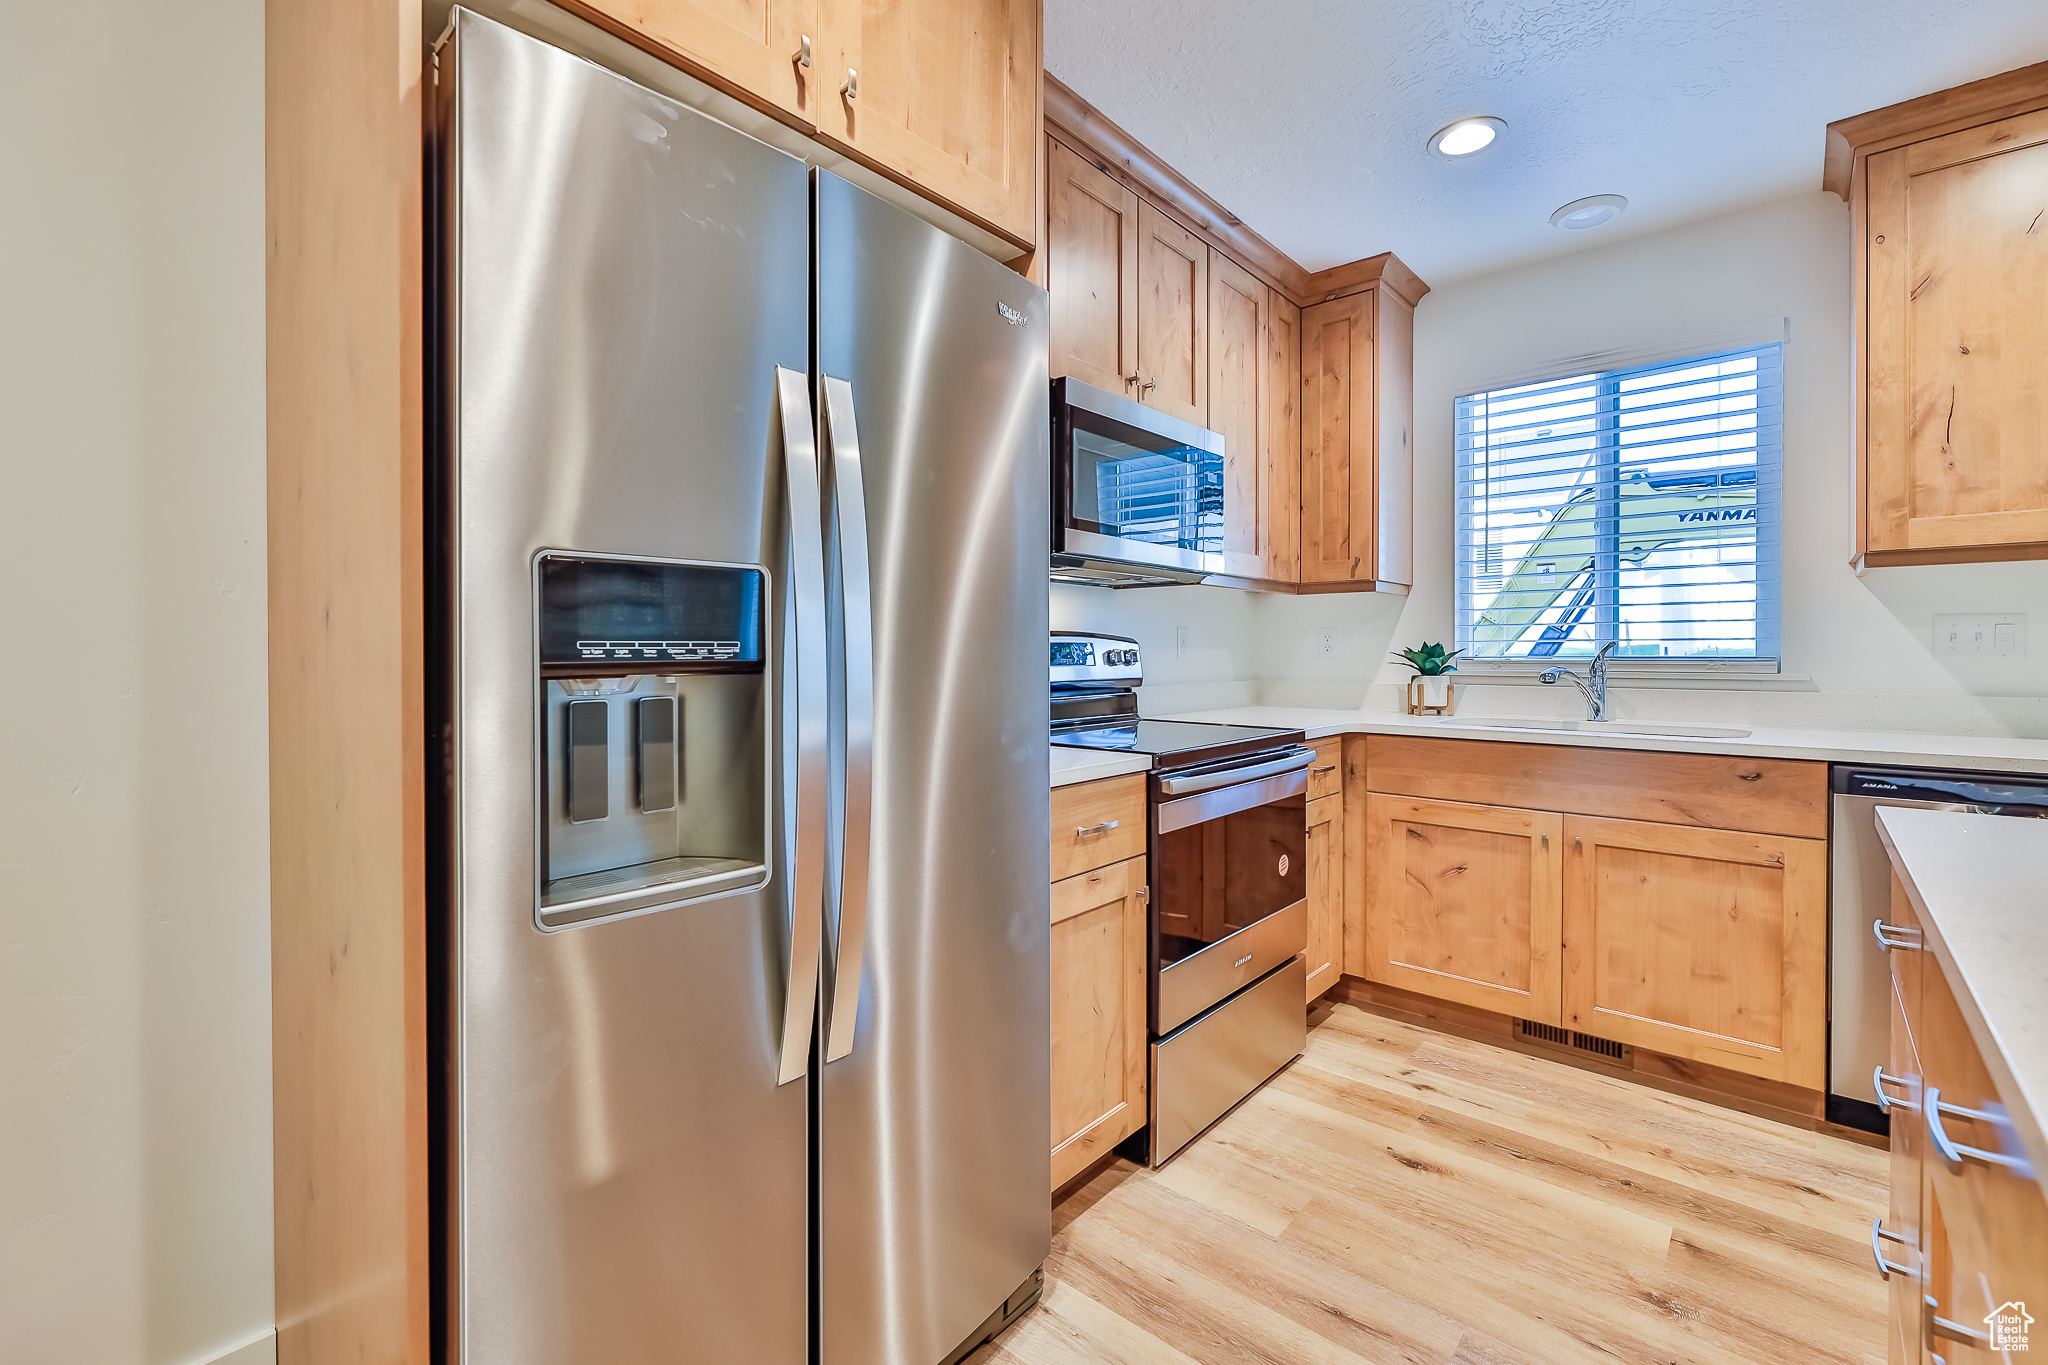 Kitchen with light wood-type flooring, appliances with stainless steel finishes, and sink